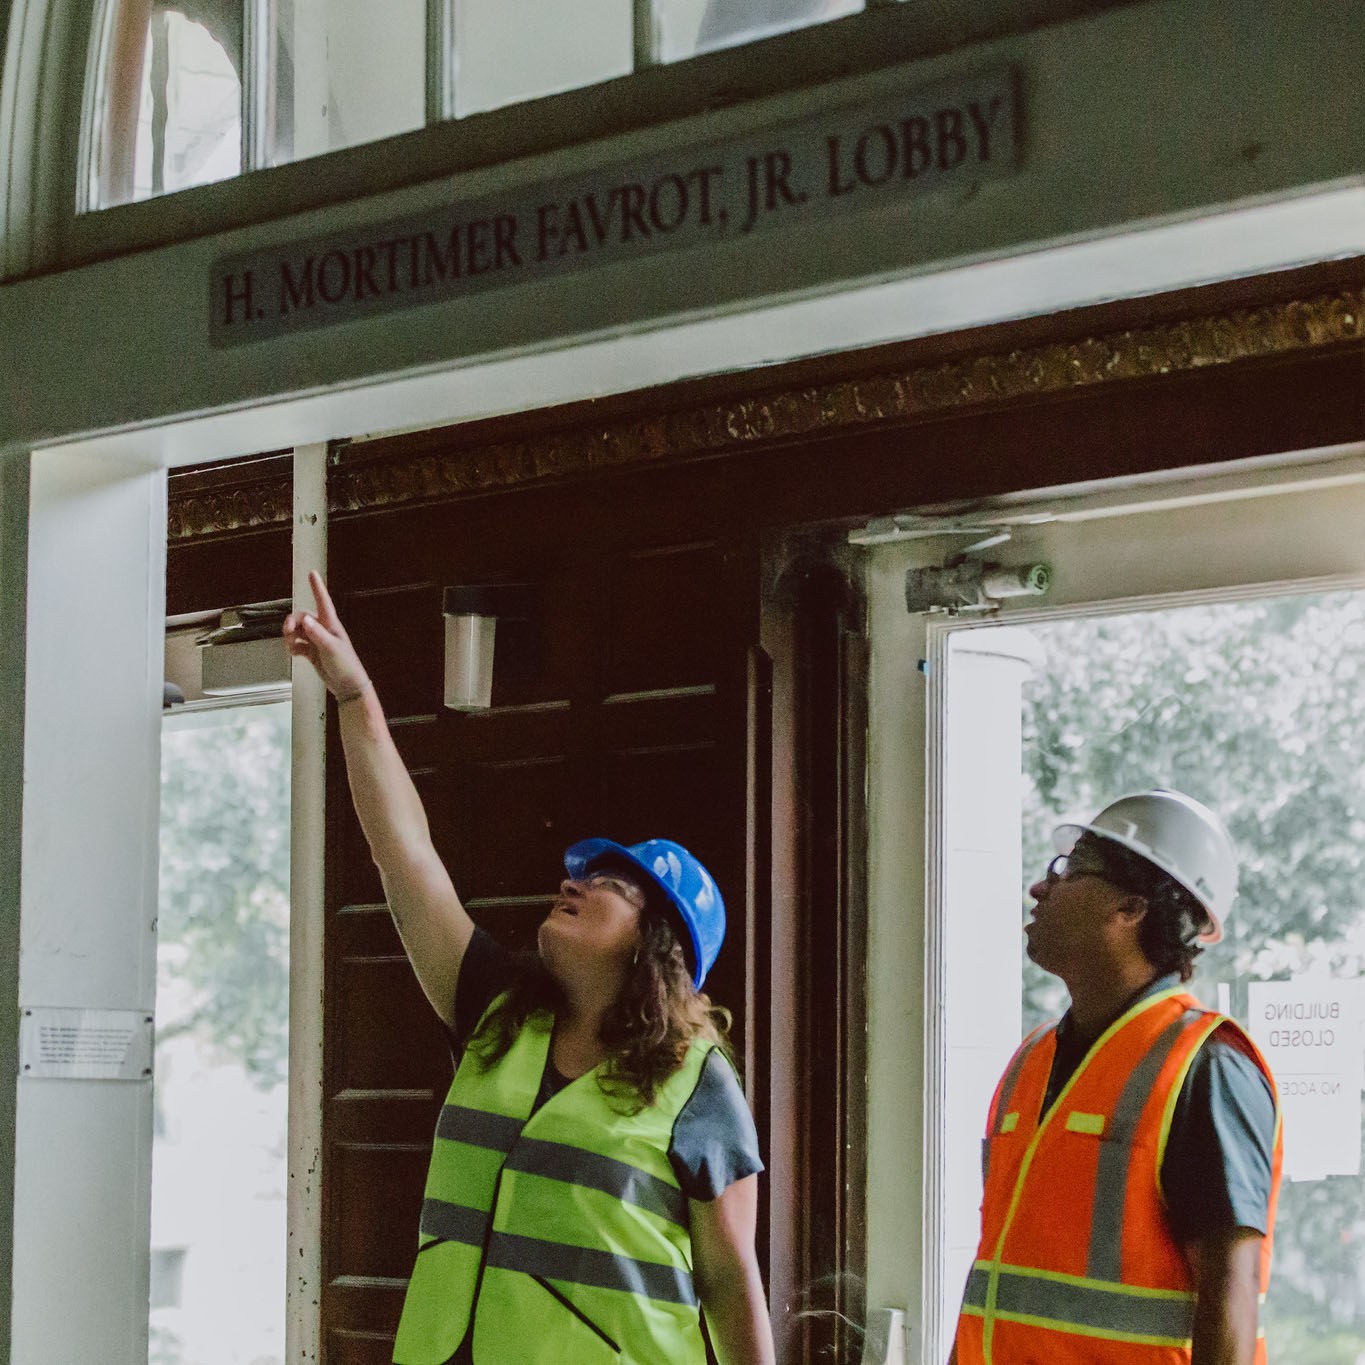 Two people wearing hard hats and safety vests stand inside the entrance of RMH lobby with one person pointing up to a beam 